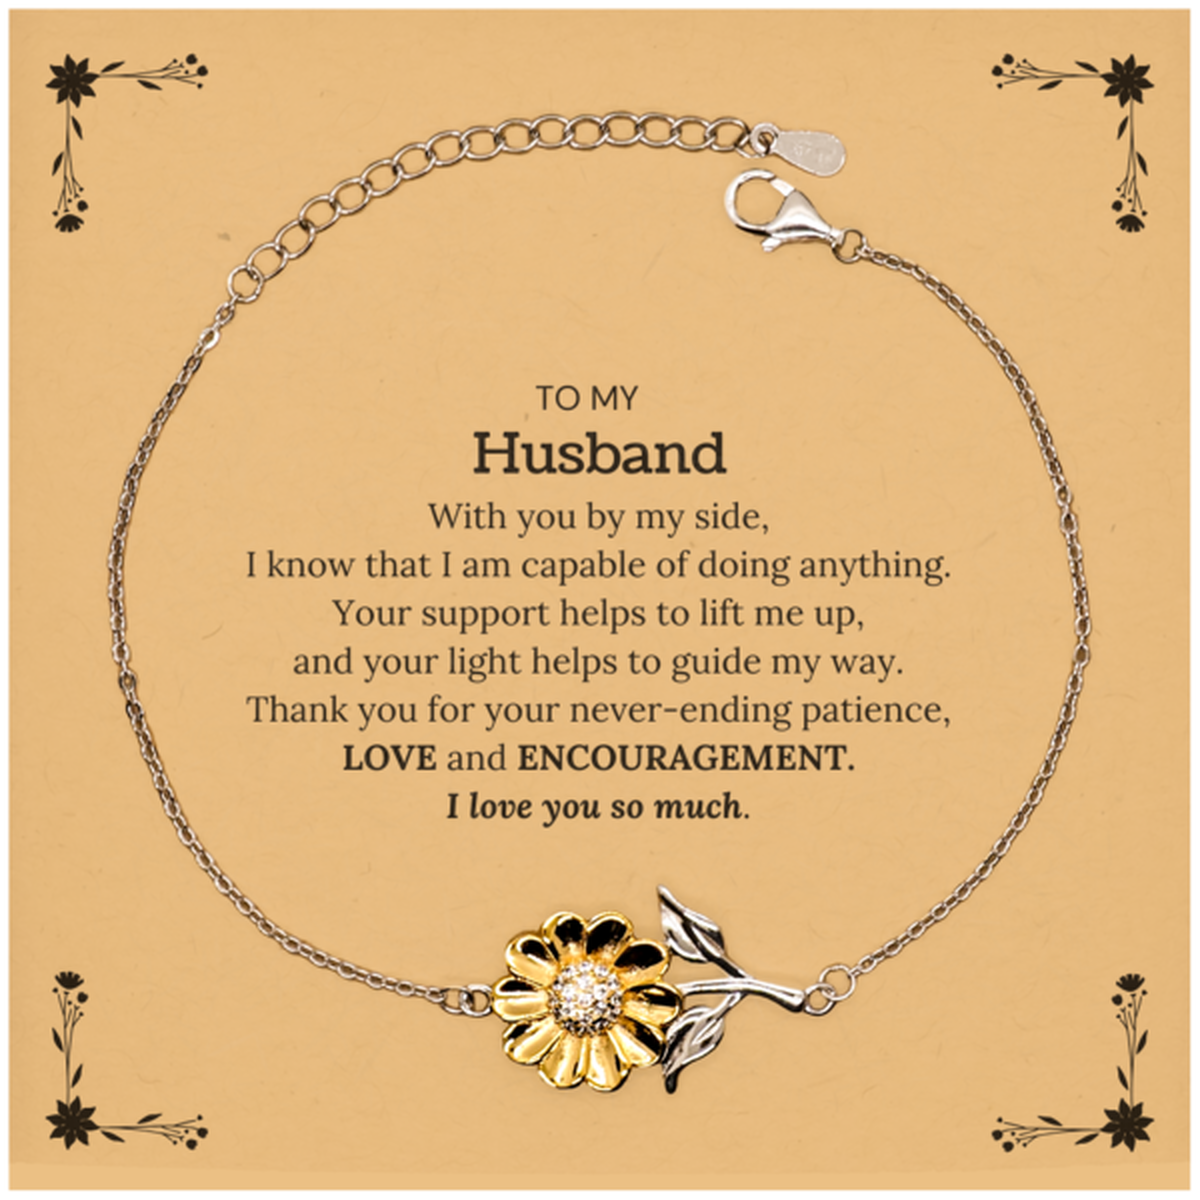 Appreciation Husband Sunflower Bracelet Gifts, To My Husband Birthday Christmas Wedding Keepsake Gifts for Husband With you by my side, I know that I am capable of doing anything. I love you so much